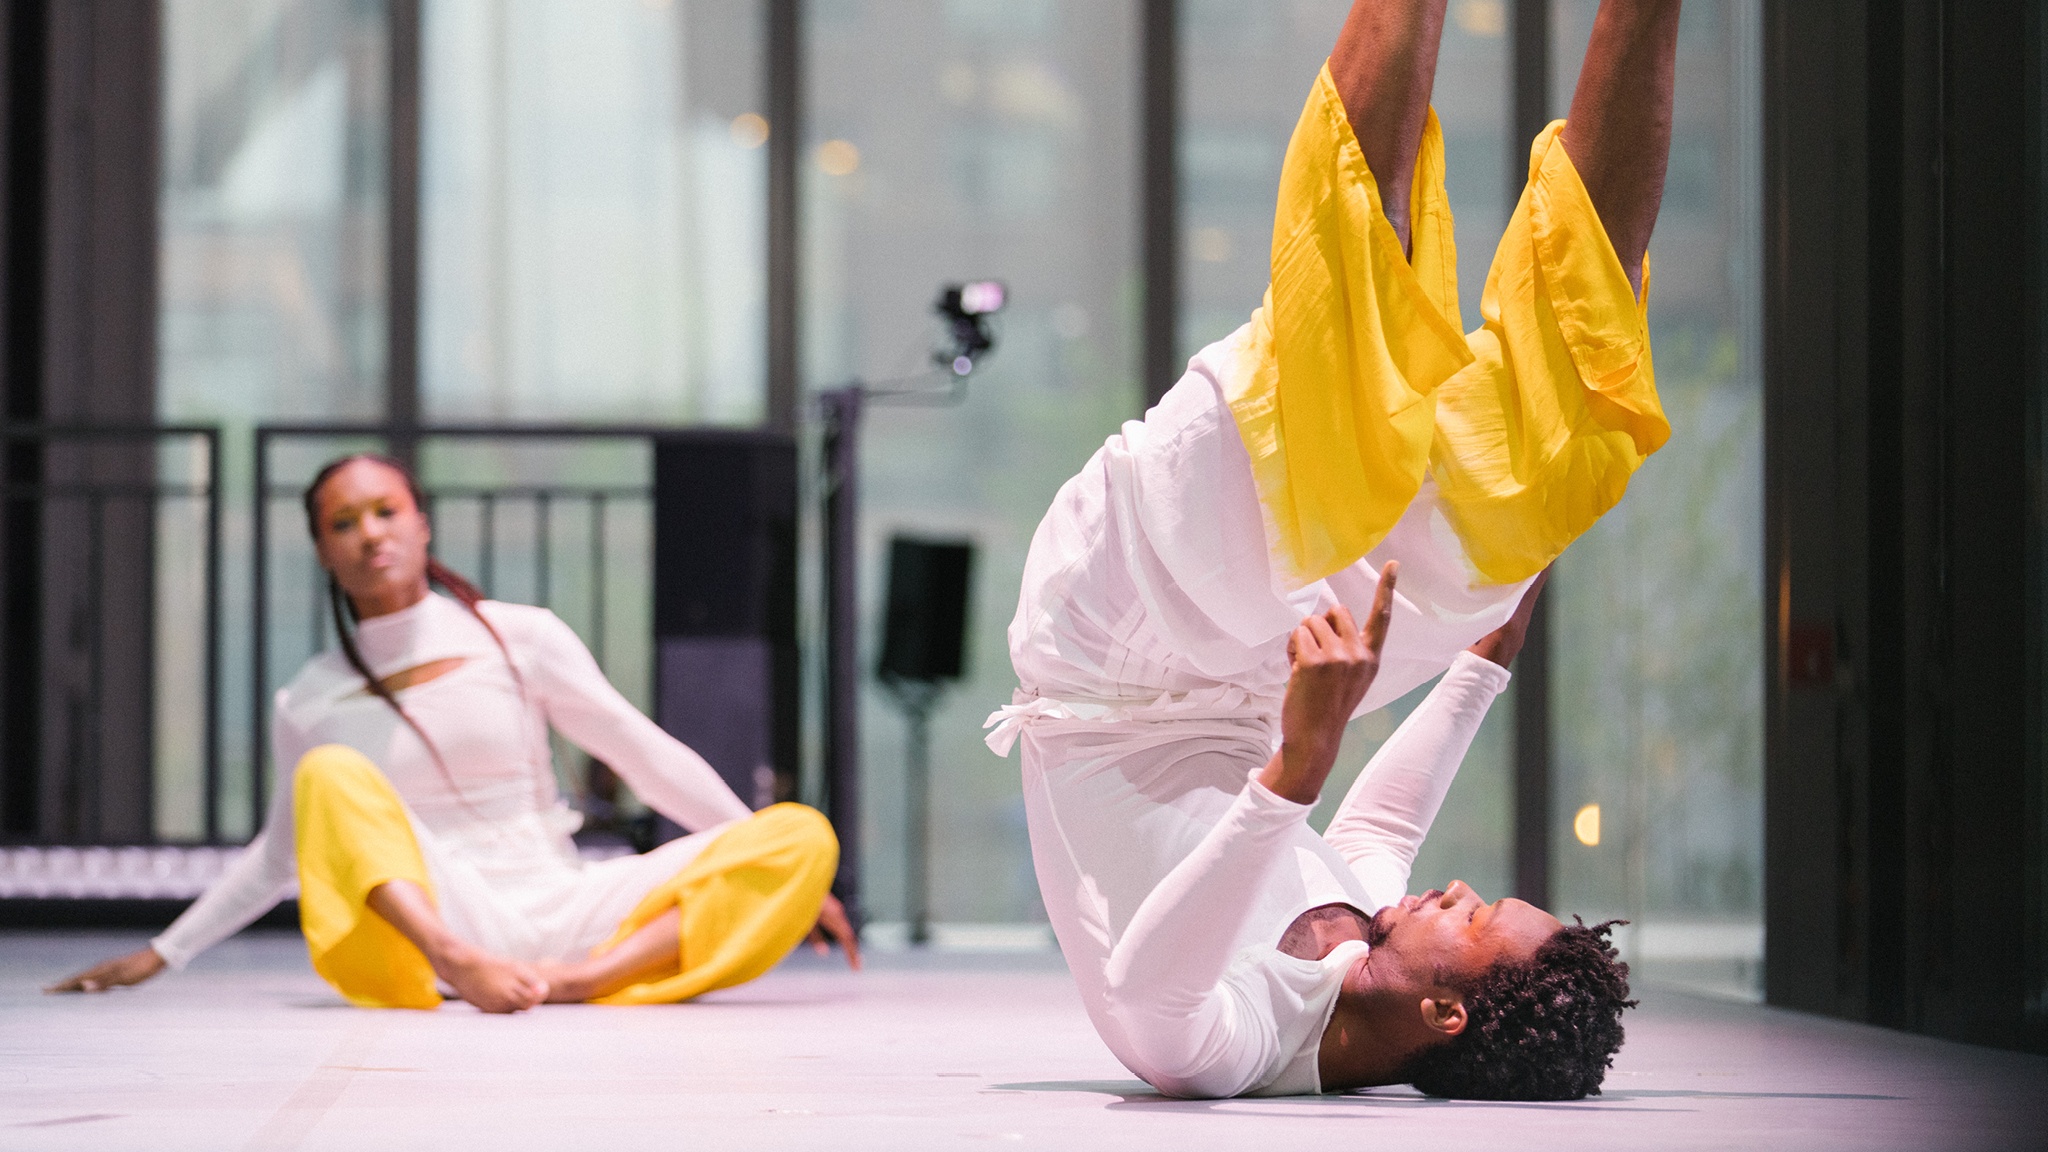 Two dancers on stage in white costumes with the legs dyed a bright yellow. In the background one dancer sits cross-legged on the ground. In the foreground the other dancer rolls backward on their back, lifting their legs high above their body.